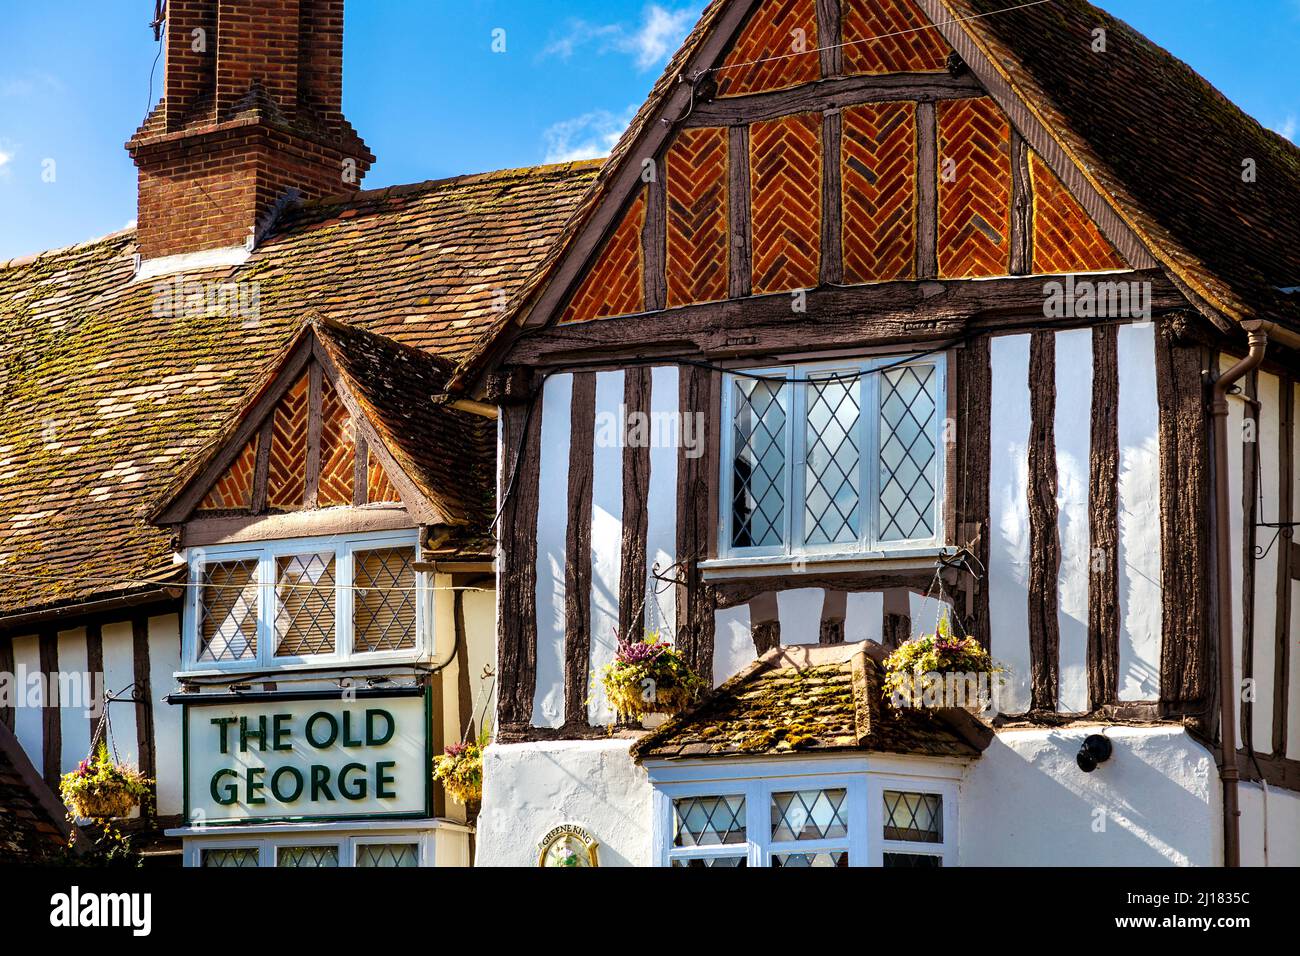 Exterior of The Old George pub originally built by Gilbertine Monks in early 12th century in the village of Ickleford near Hitchin, Hertfordshire, UK Stock Photo